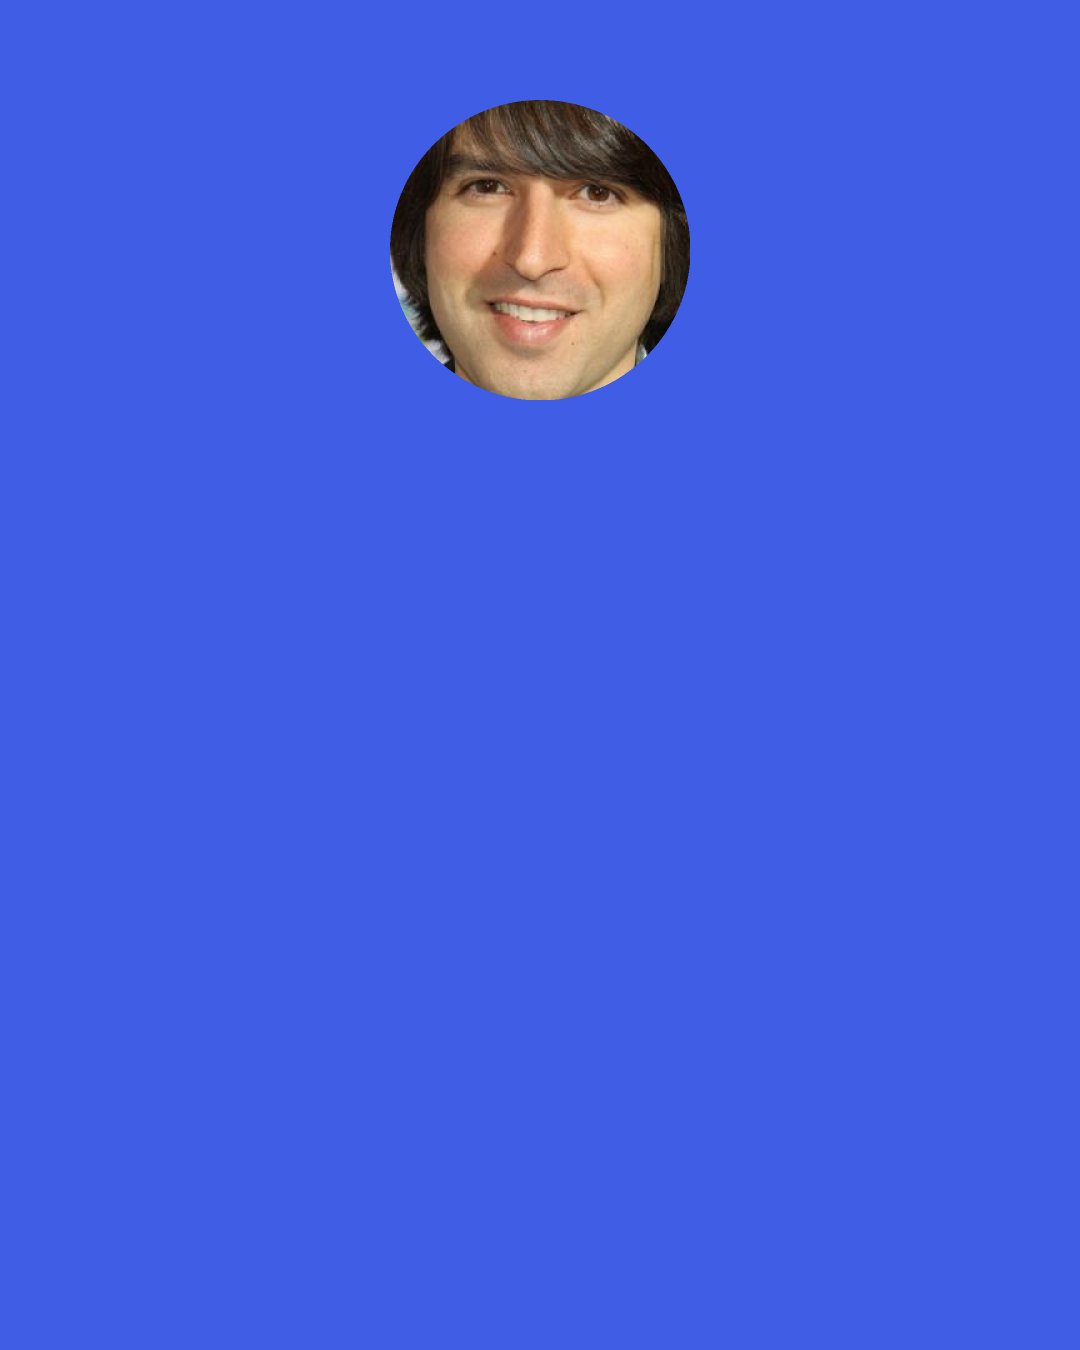 Demetri Martin: I got some new pajamas with pockets in 'em. Which is great, because before that, I used to have to hold stuff when I slept. But now I'm like, 'Where's my planner? There it is. "Keep sleeping." All right, perfect.'